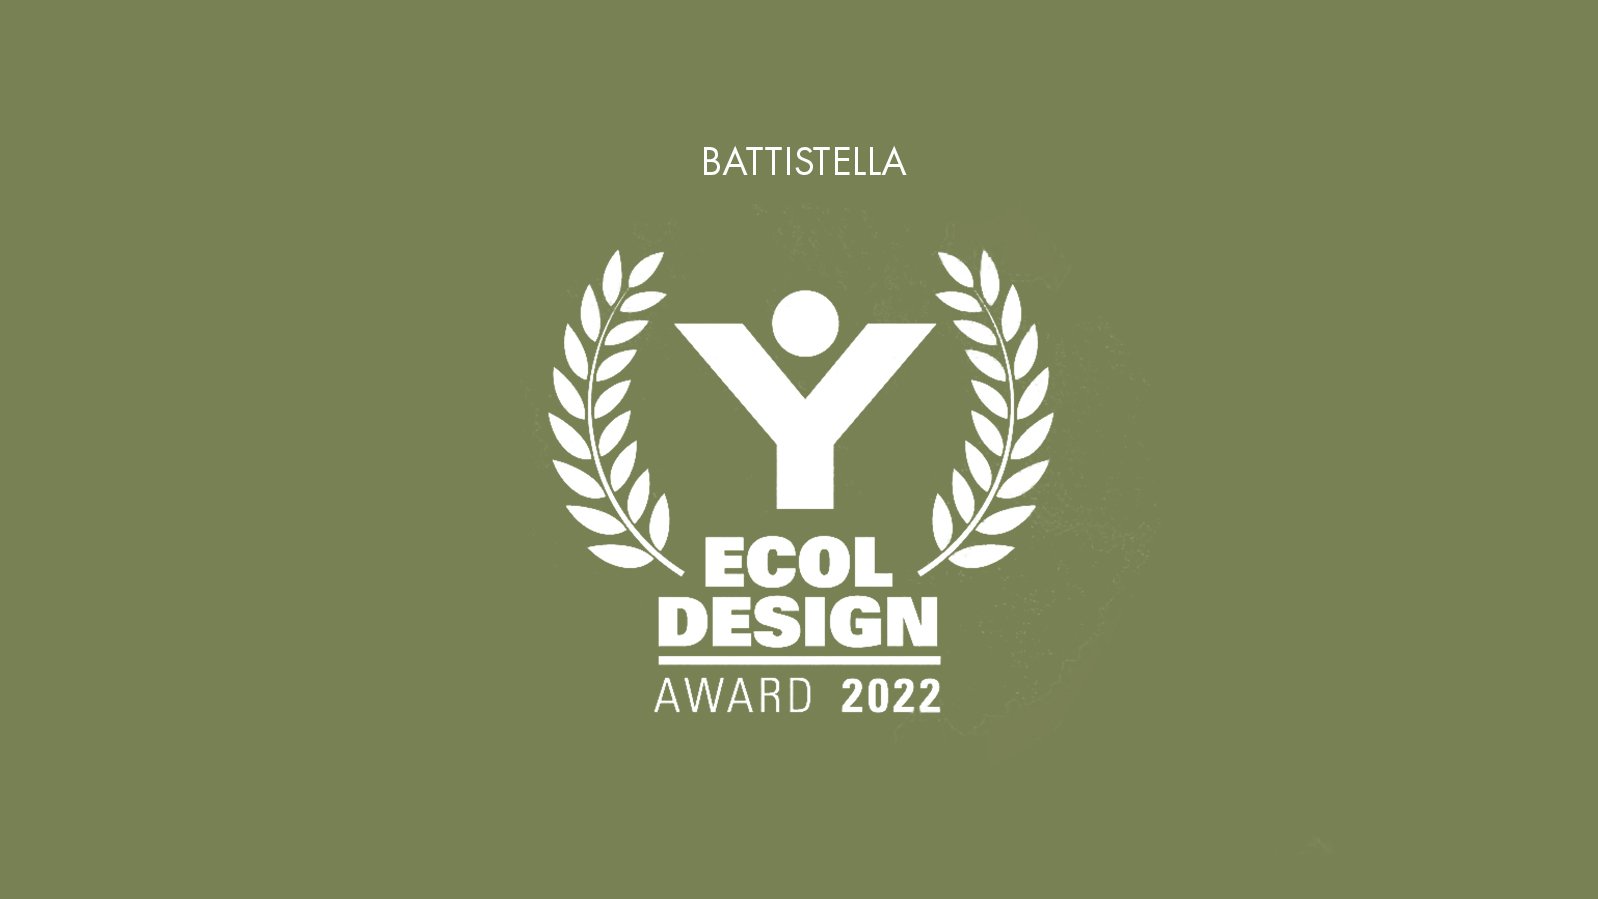 Battistella has received the ECOL DESIGN AWARD from Recycla